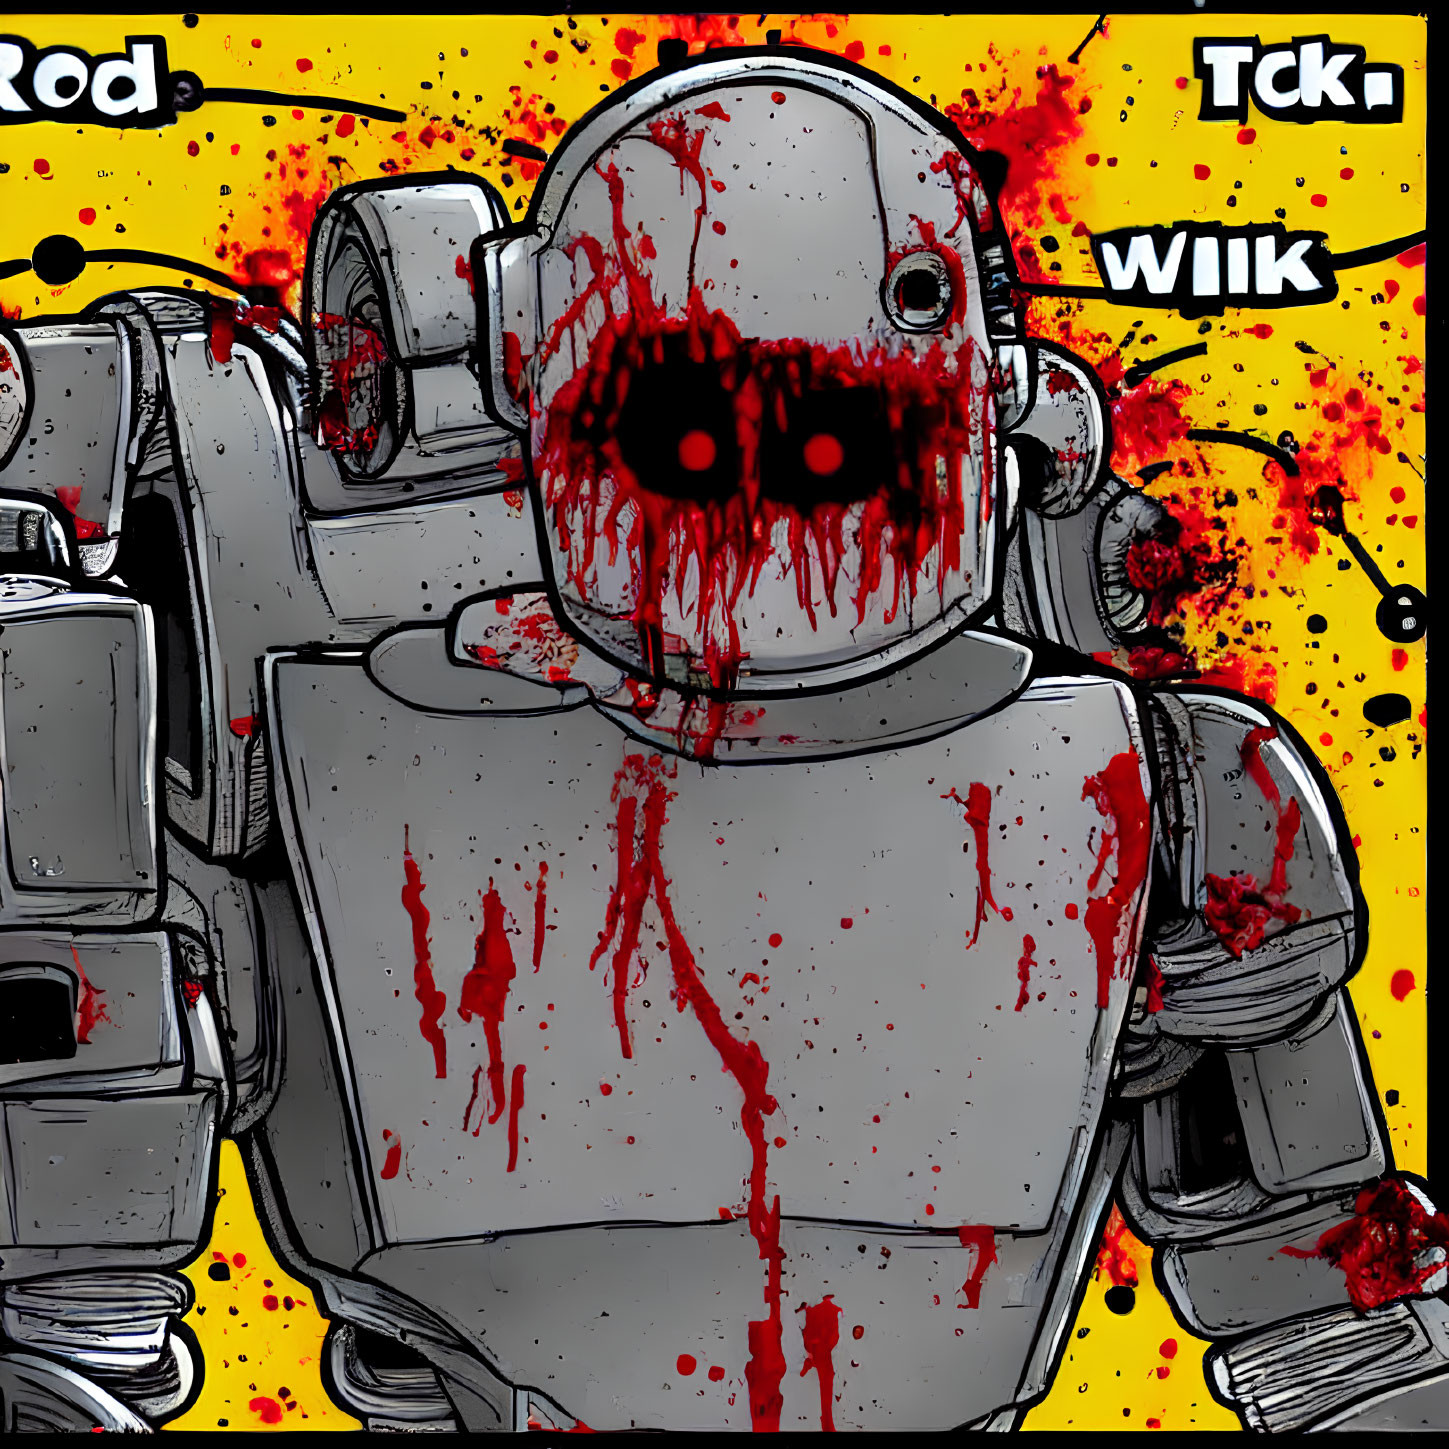 Robot illustration with red splatters on yellow background and onomatopoeic sounds.